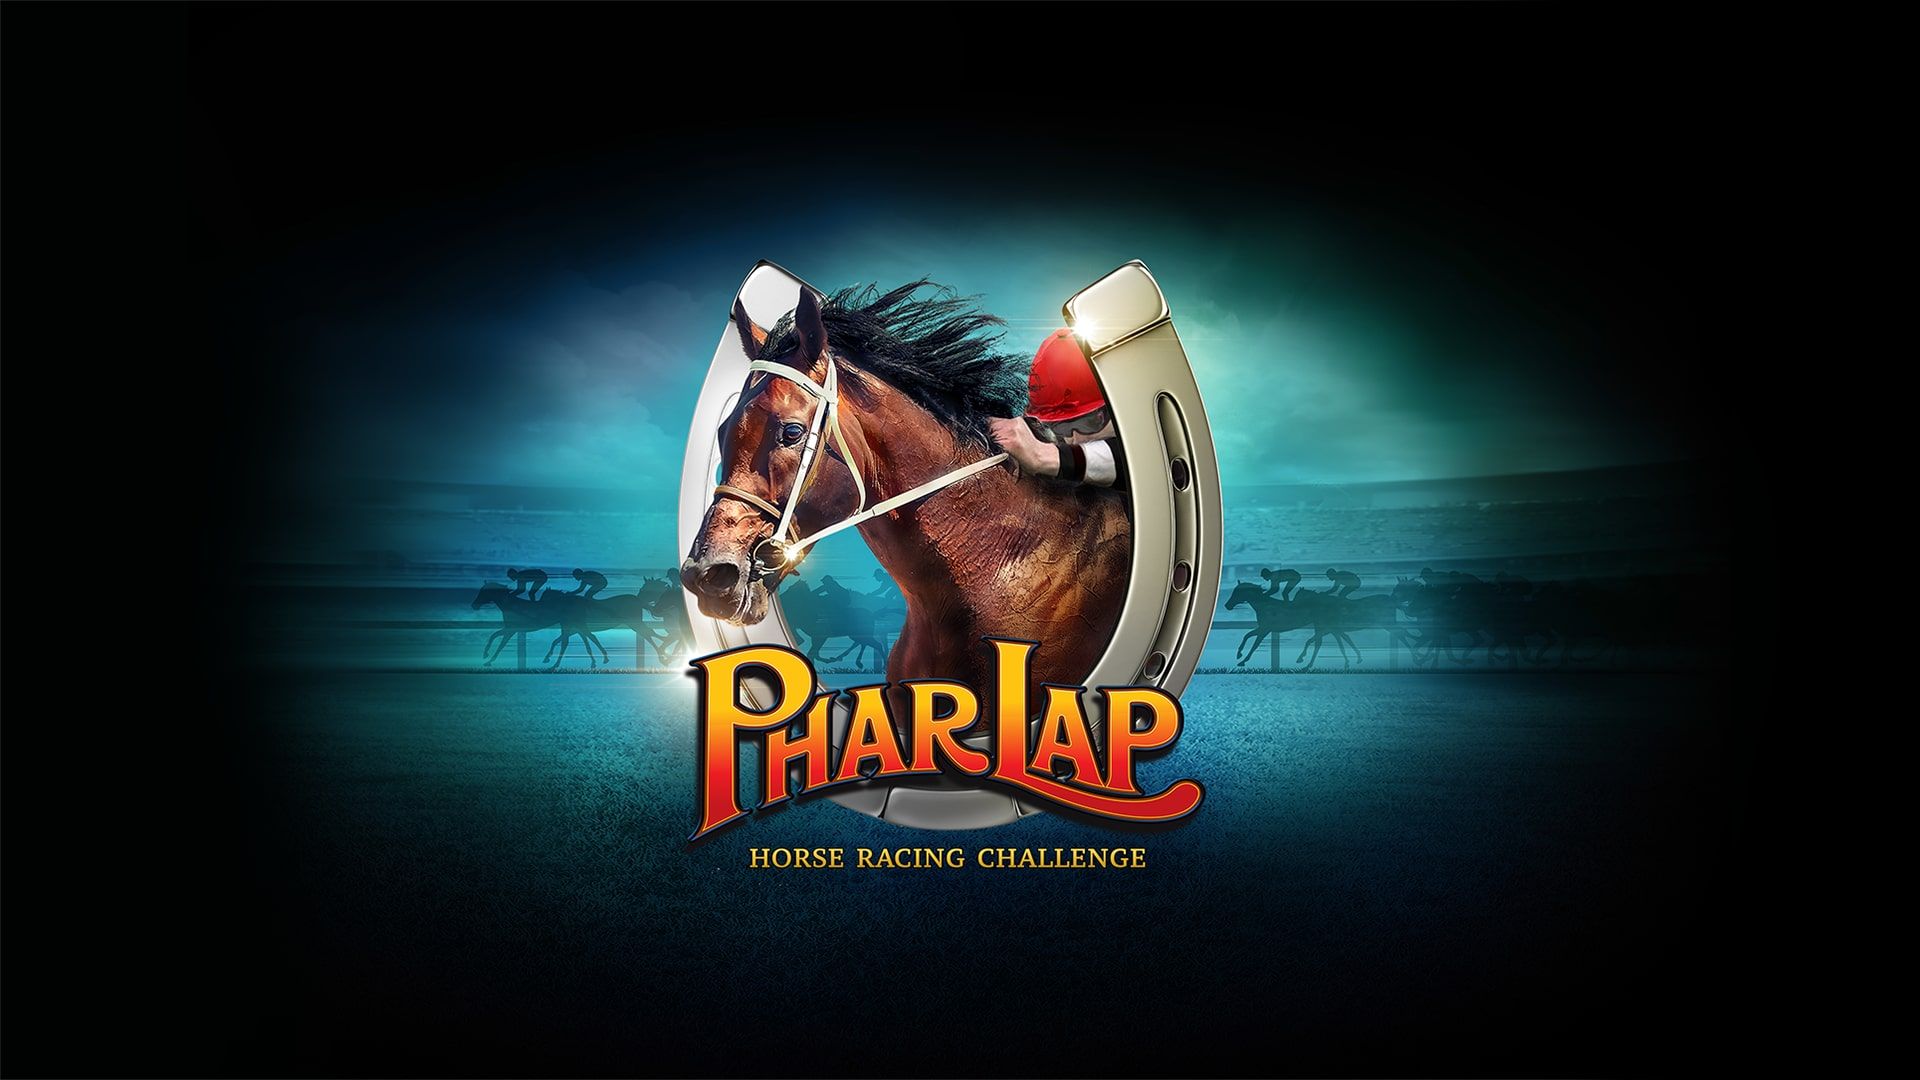 Phar Lap - Horse Racing Challenge cover image